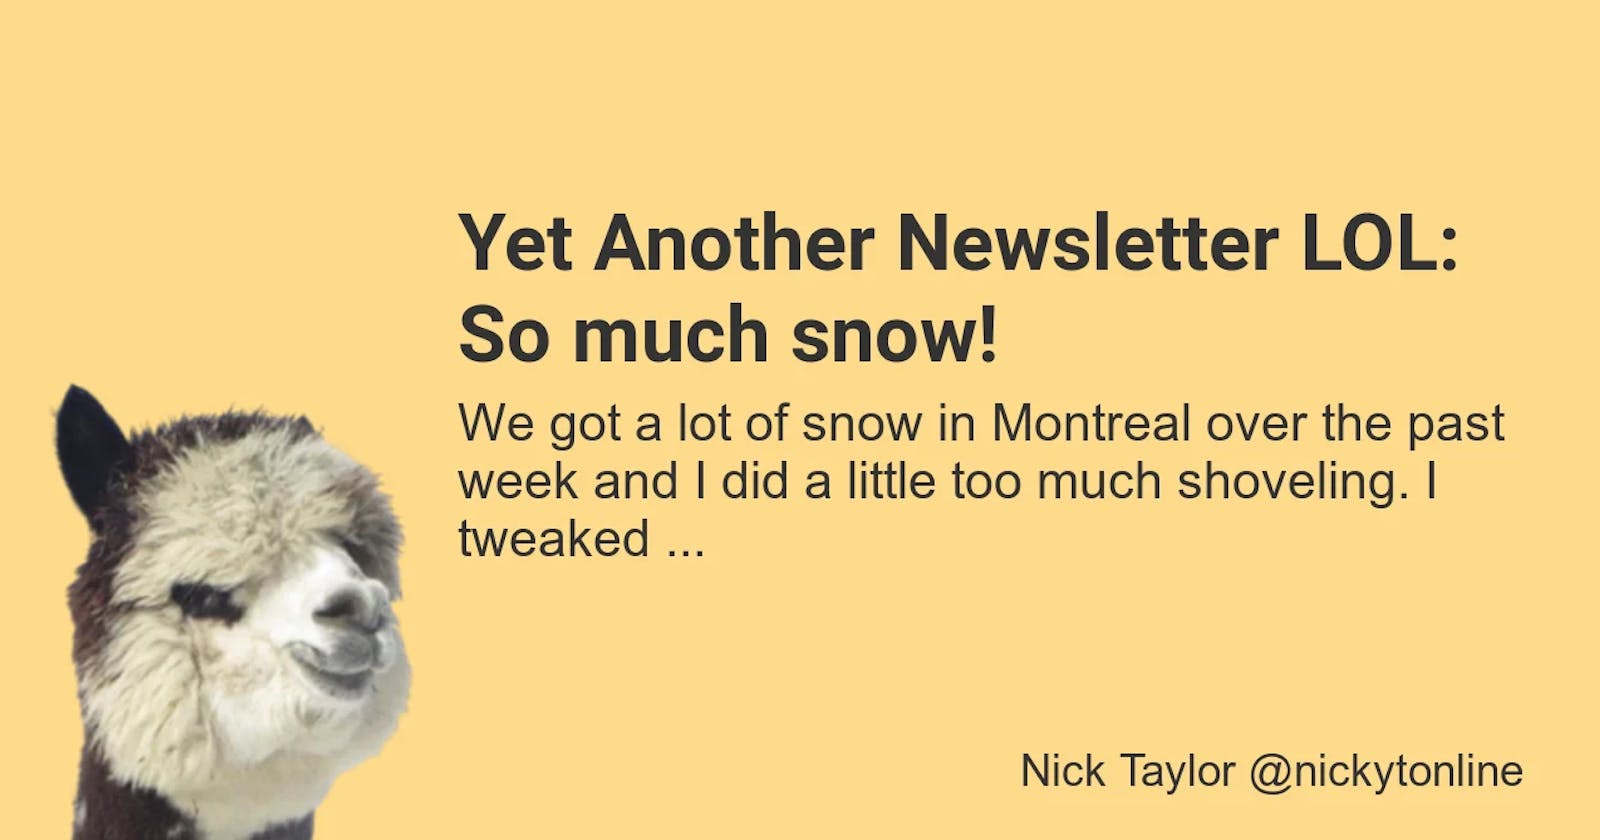 Yet Another Newsletter LOL: So much snow!